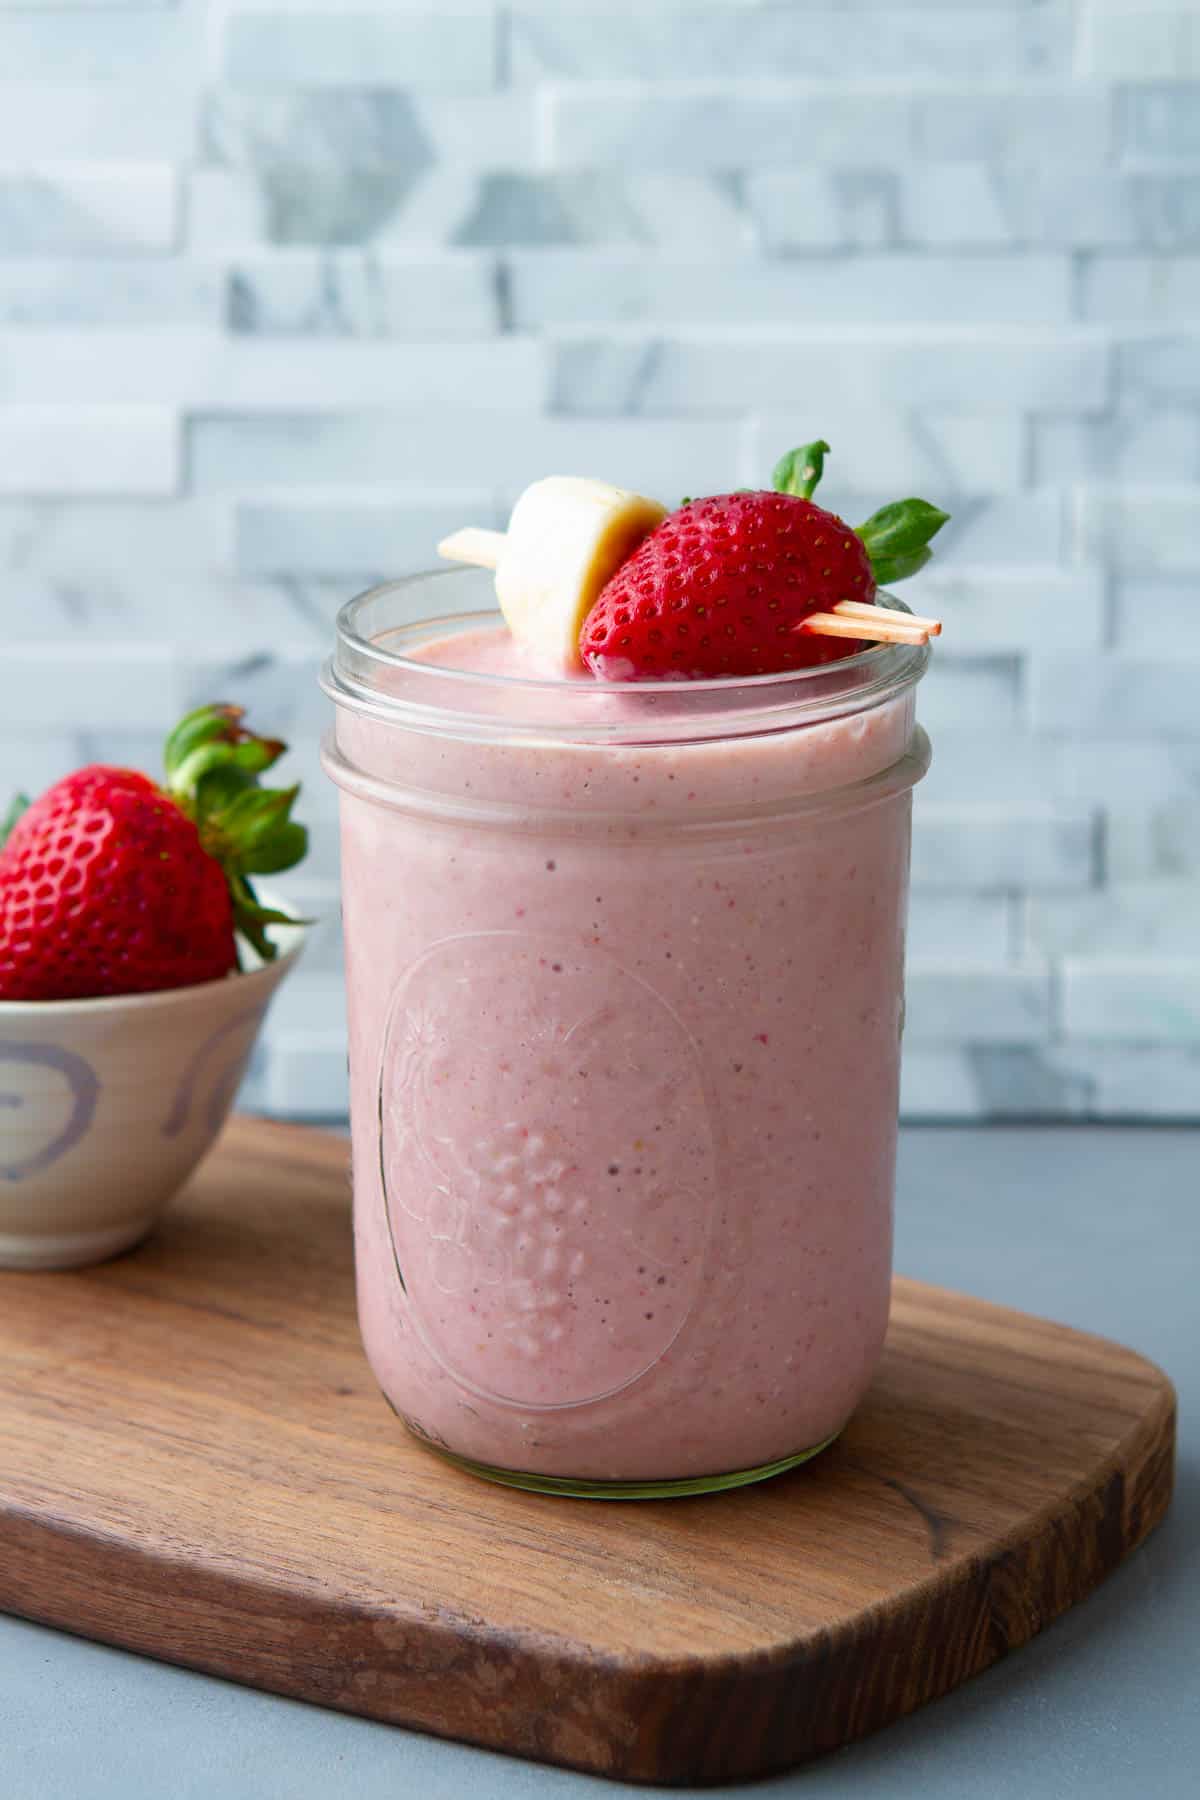 Mason jar filled with strawberry smoothie, on a wooden board.